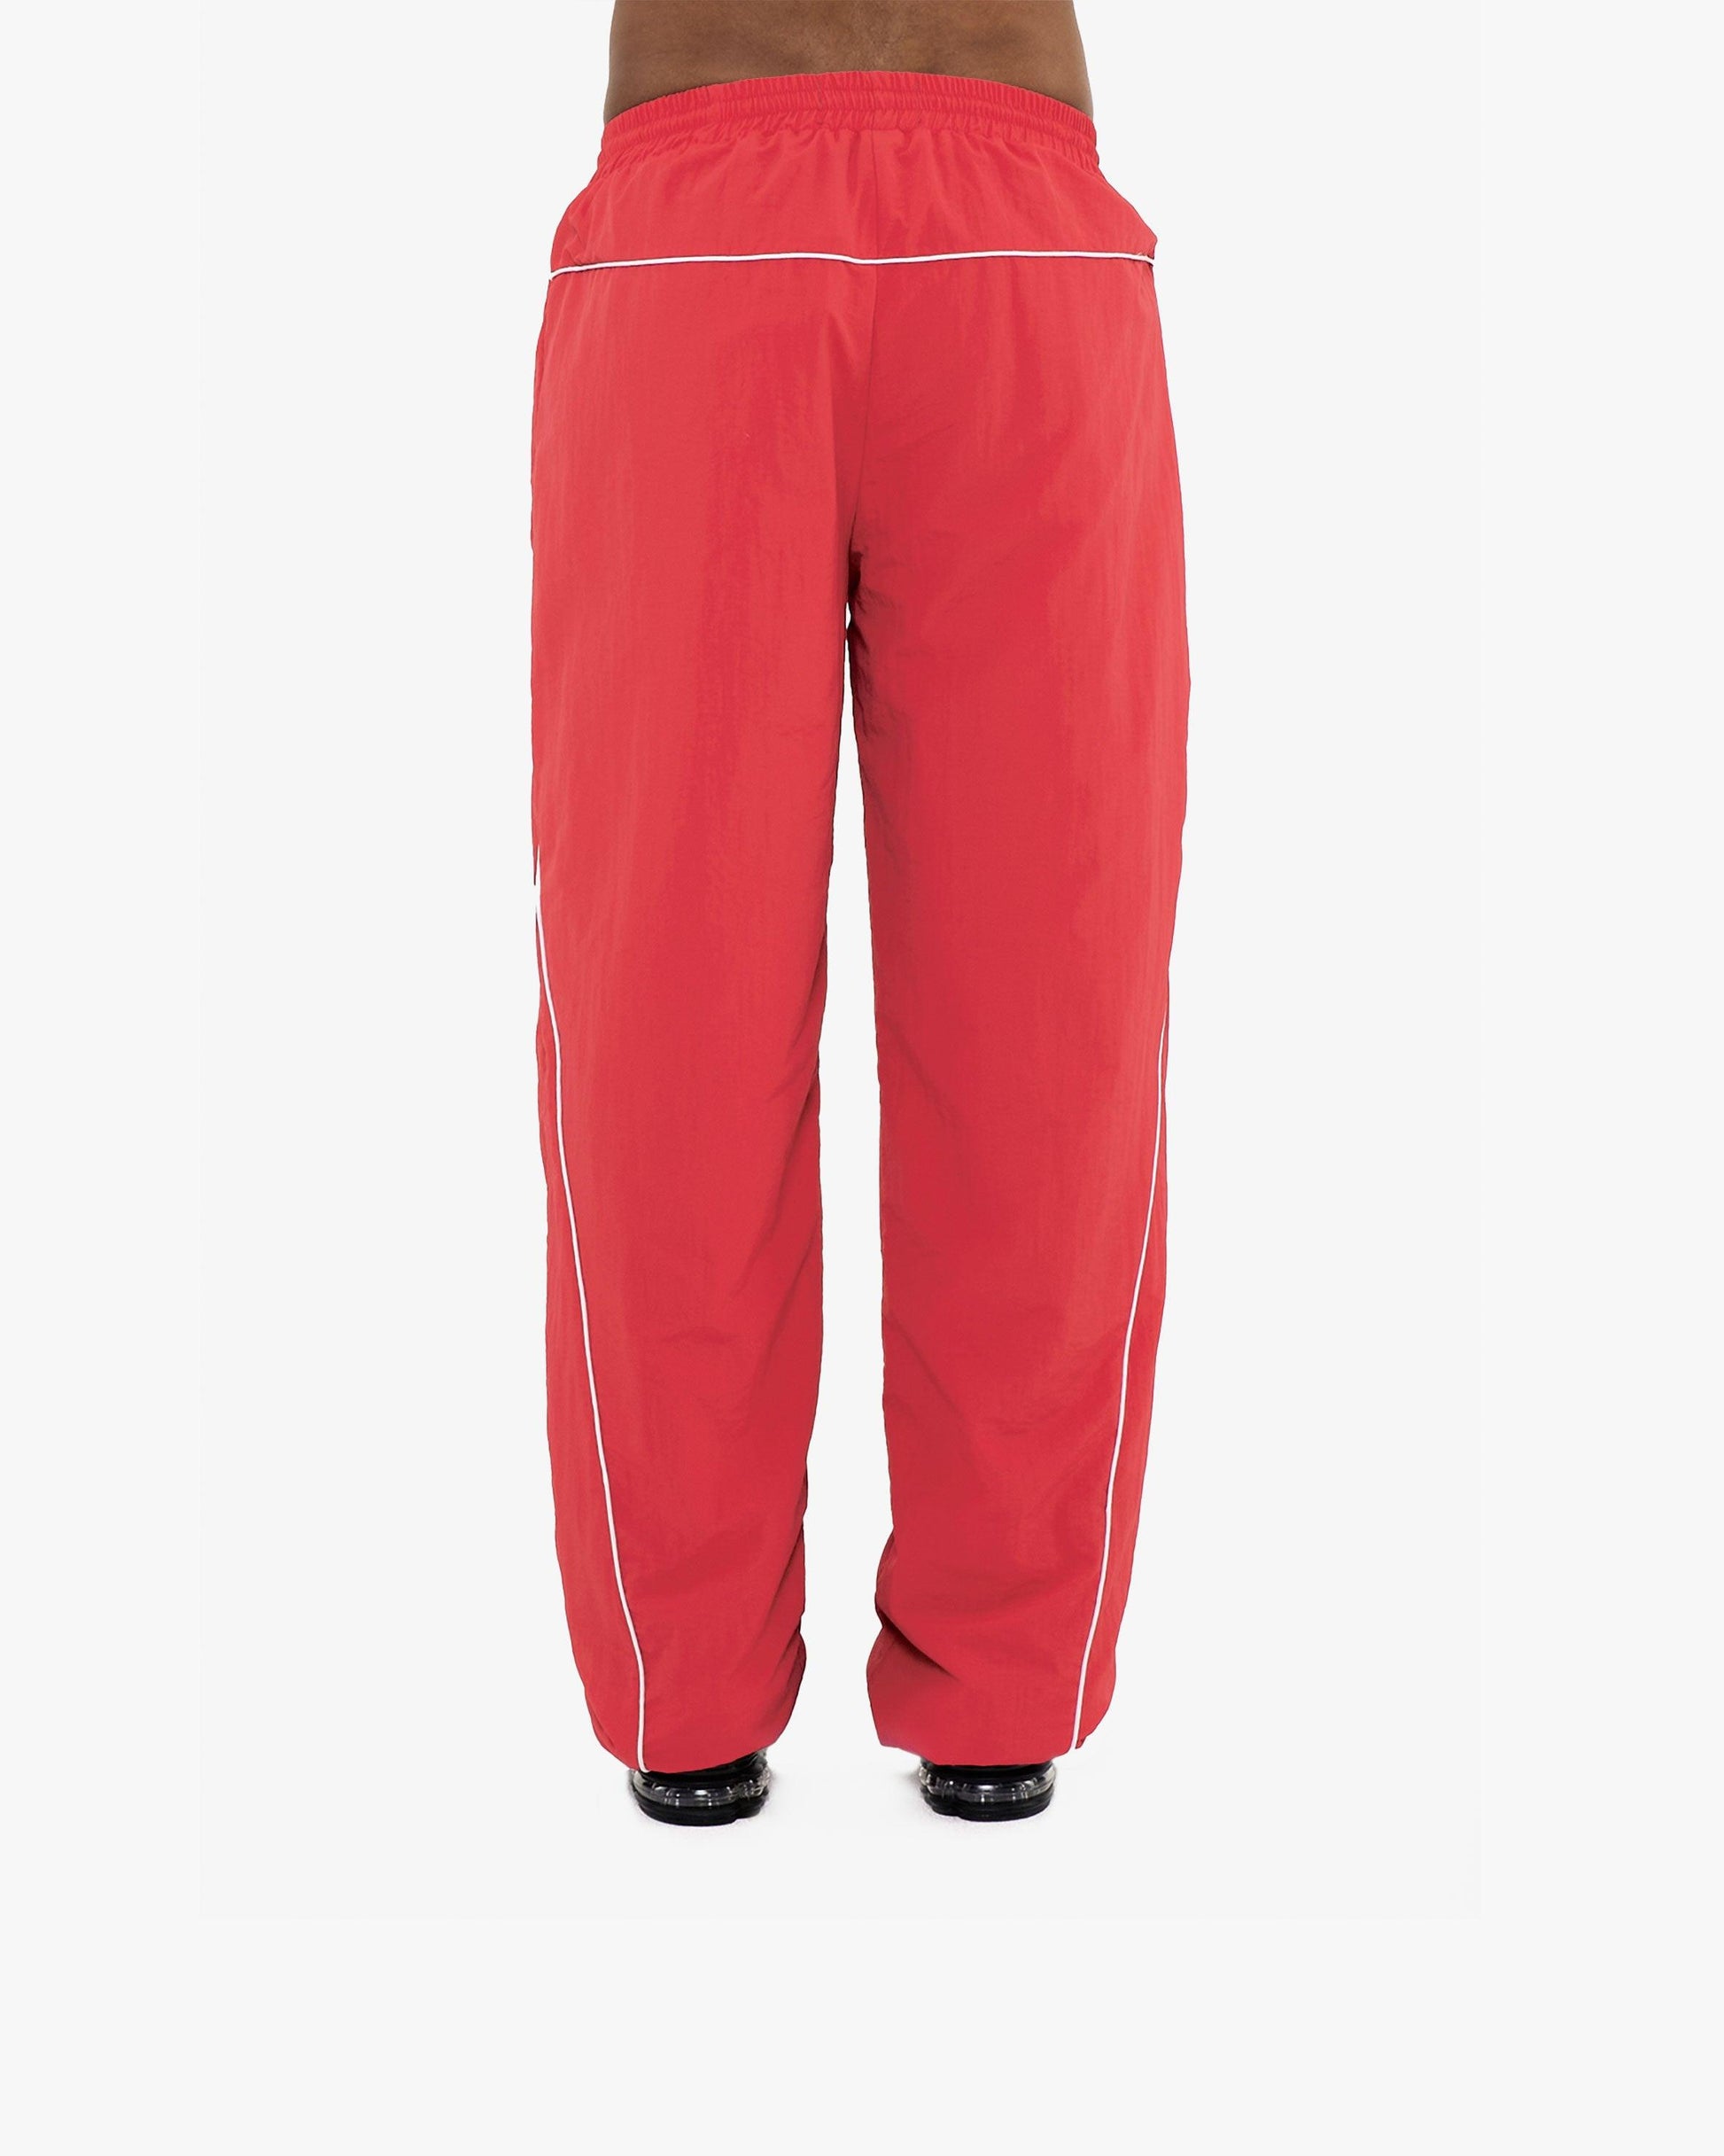 TRACK PANTS RED - VICINITY